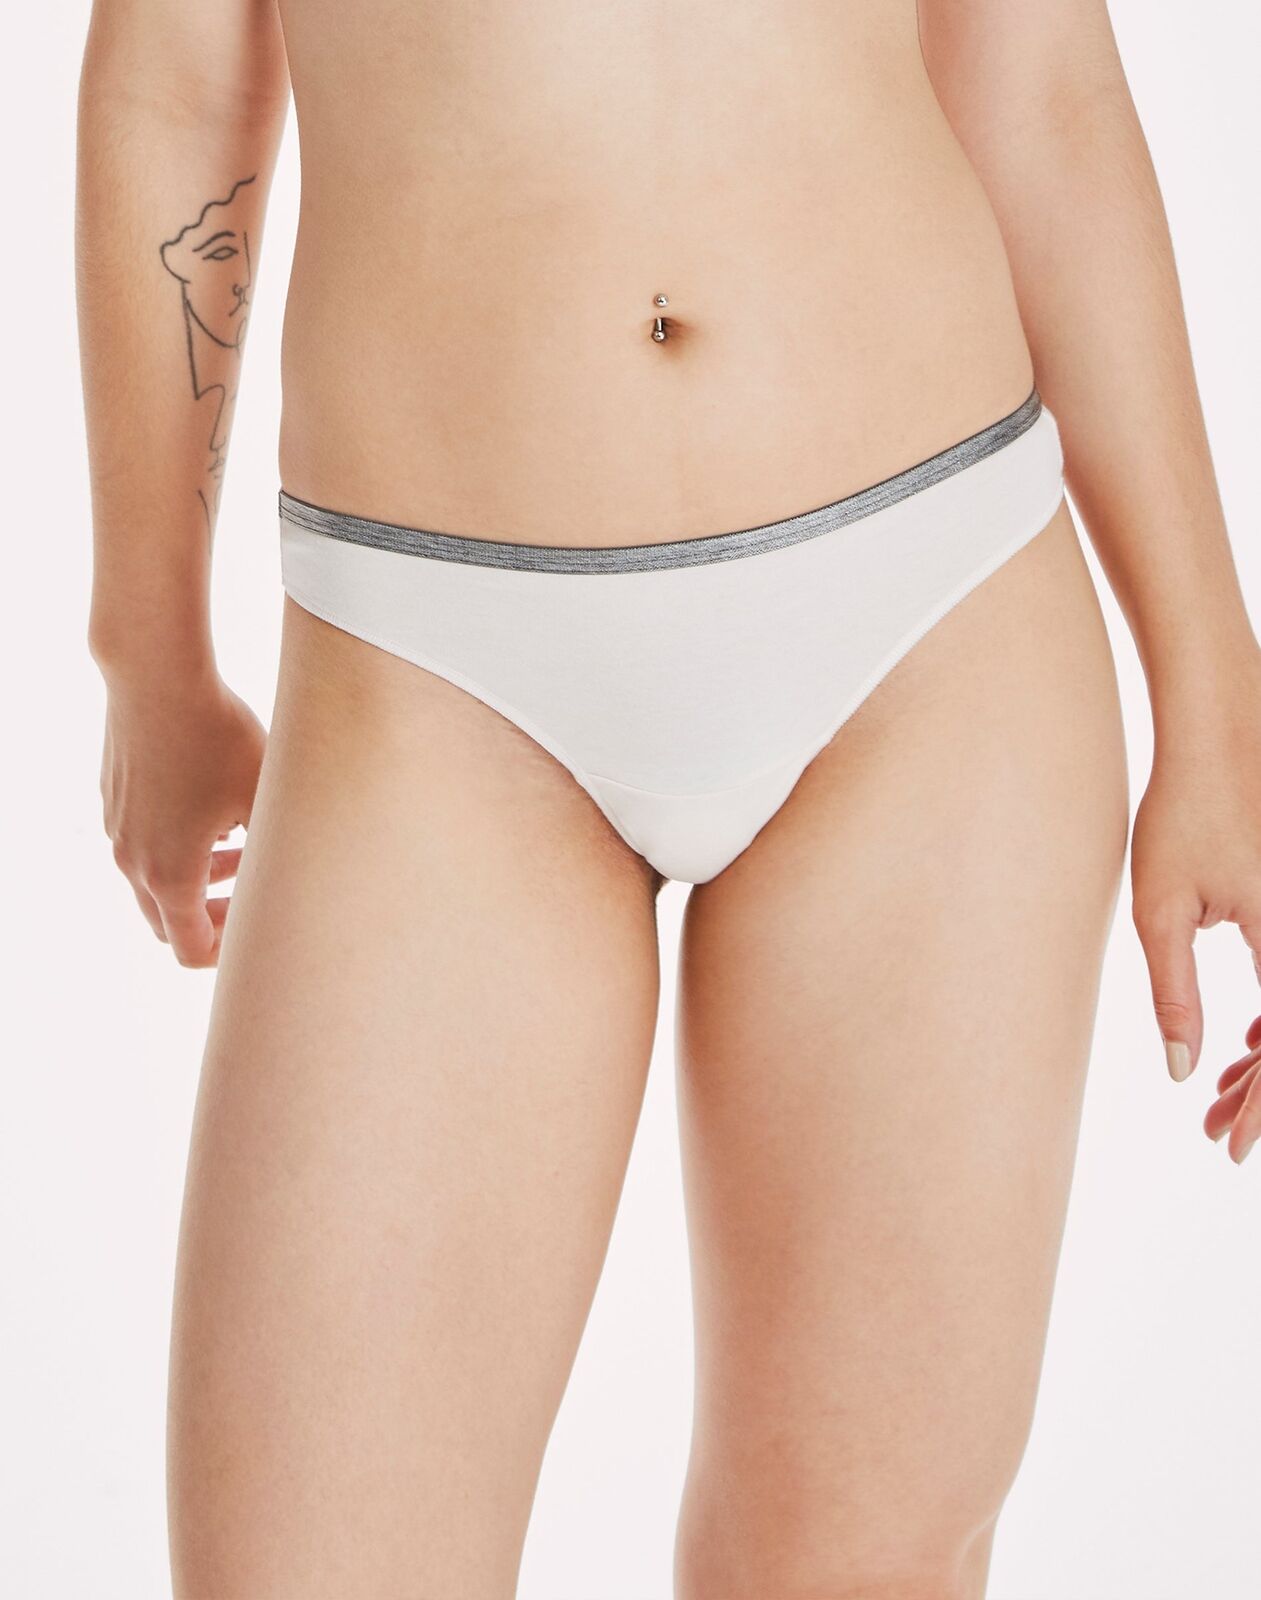 Hanes Women's Cotton Stretch Thong – HD43P4 – Pack of 4 - Basics by Mail